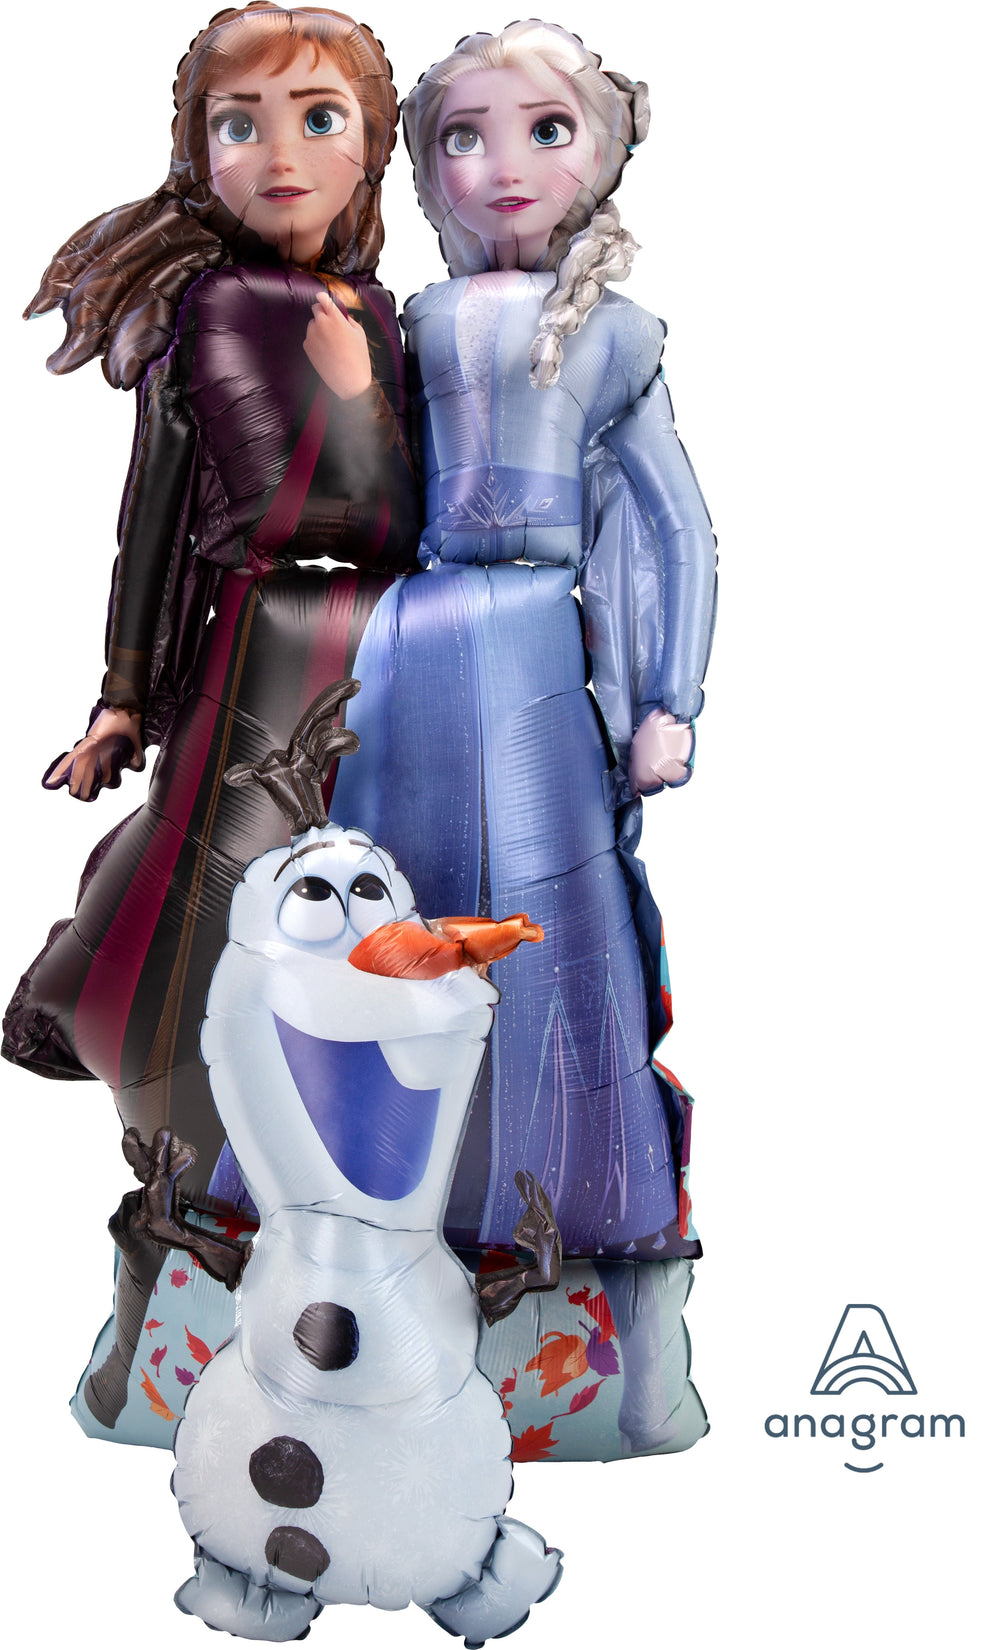 Epic Frozen 2 Elsa & Anna Giant Balloon –Perfect Party Decor with Long-Lasting Float Time